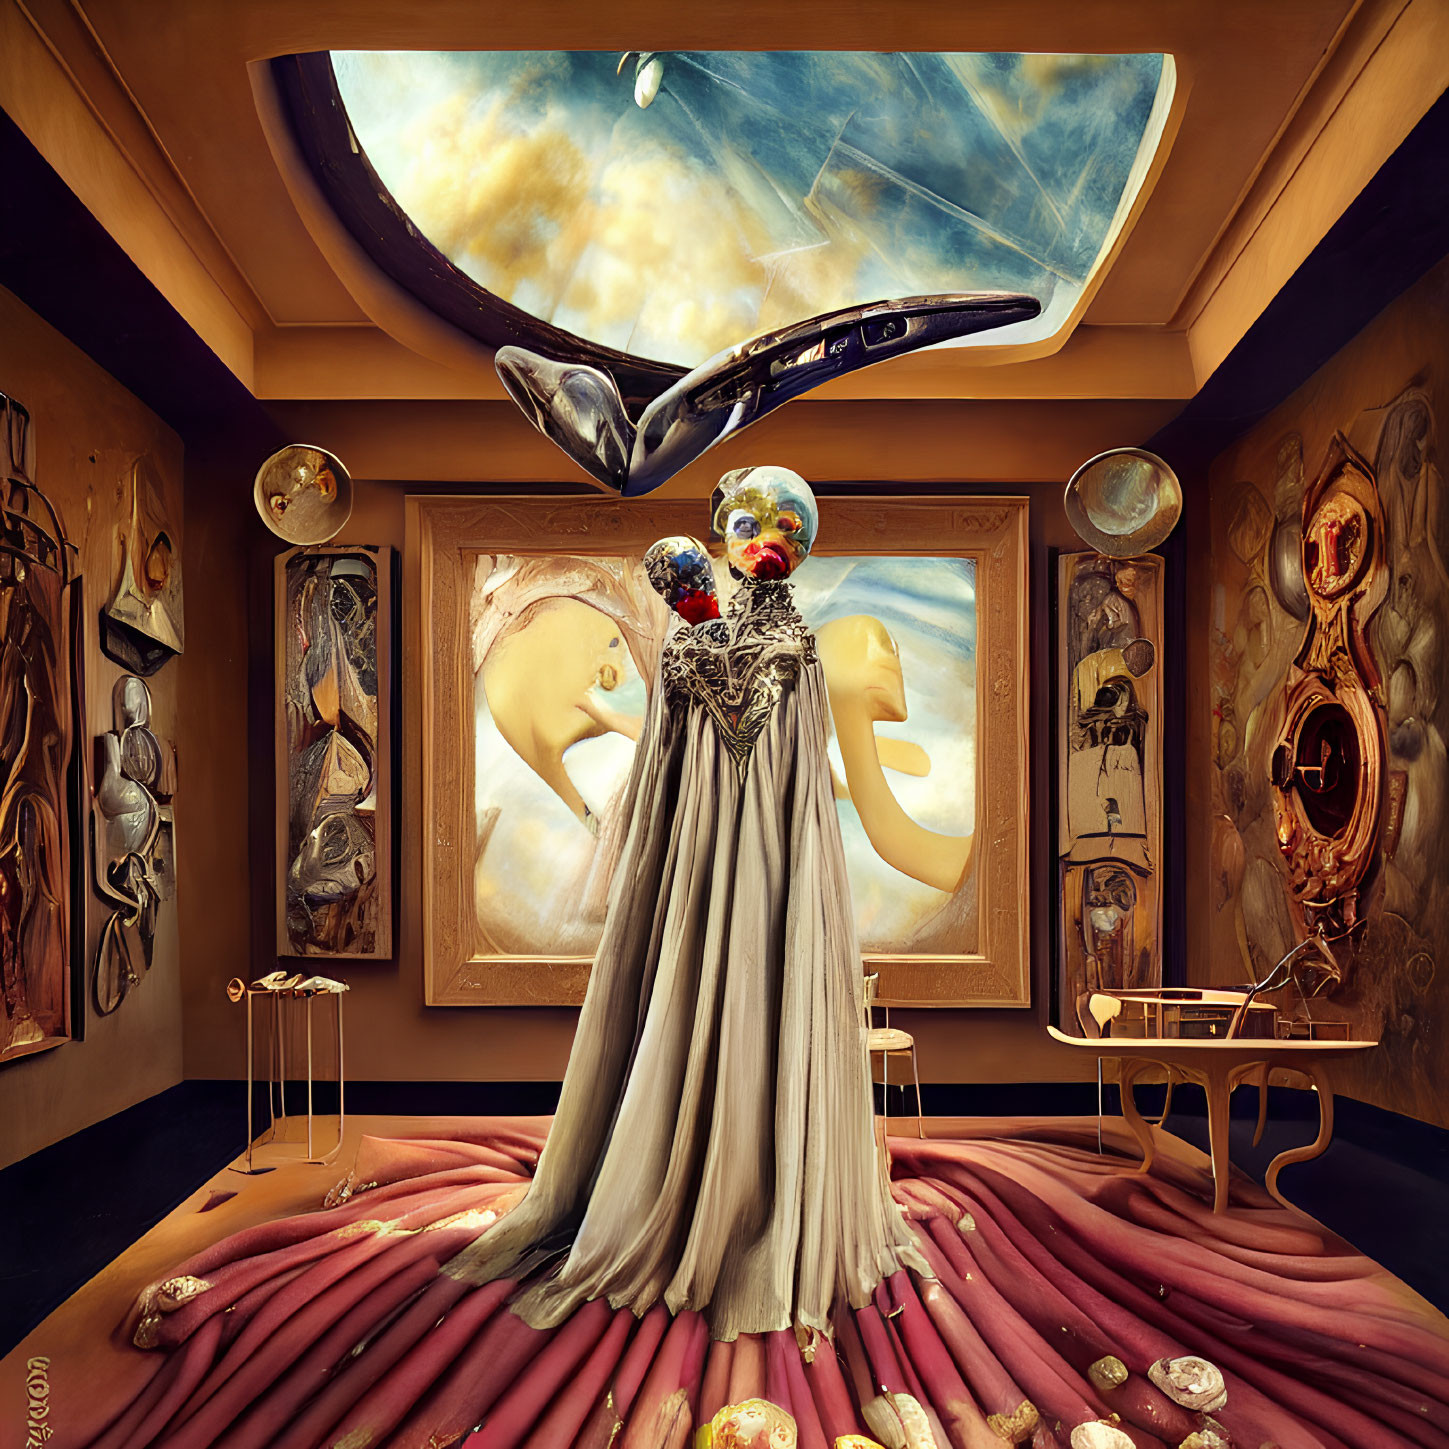 Abstract paintings and distorted mirrors in surreal art gallery